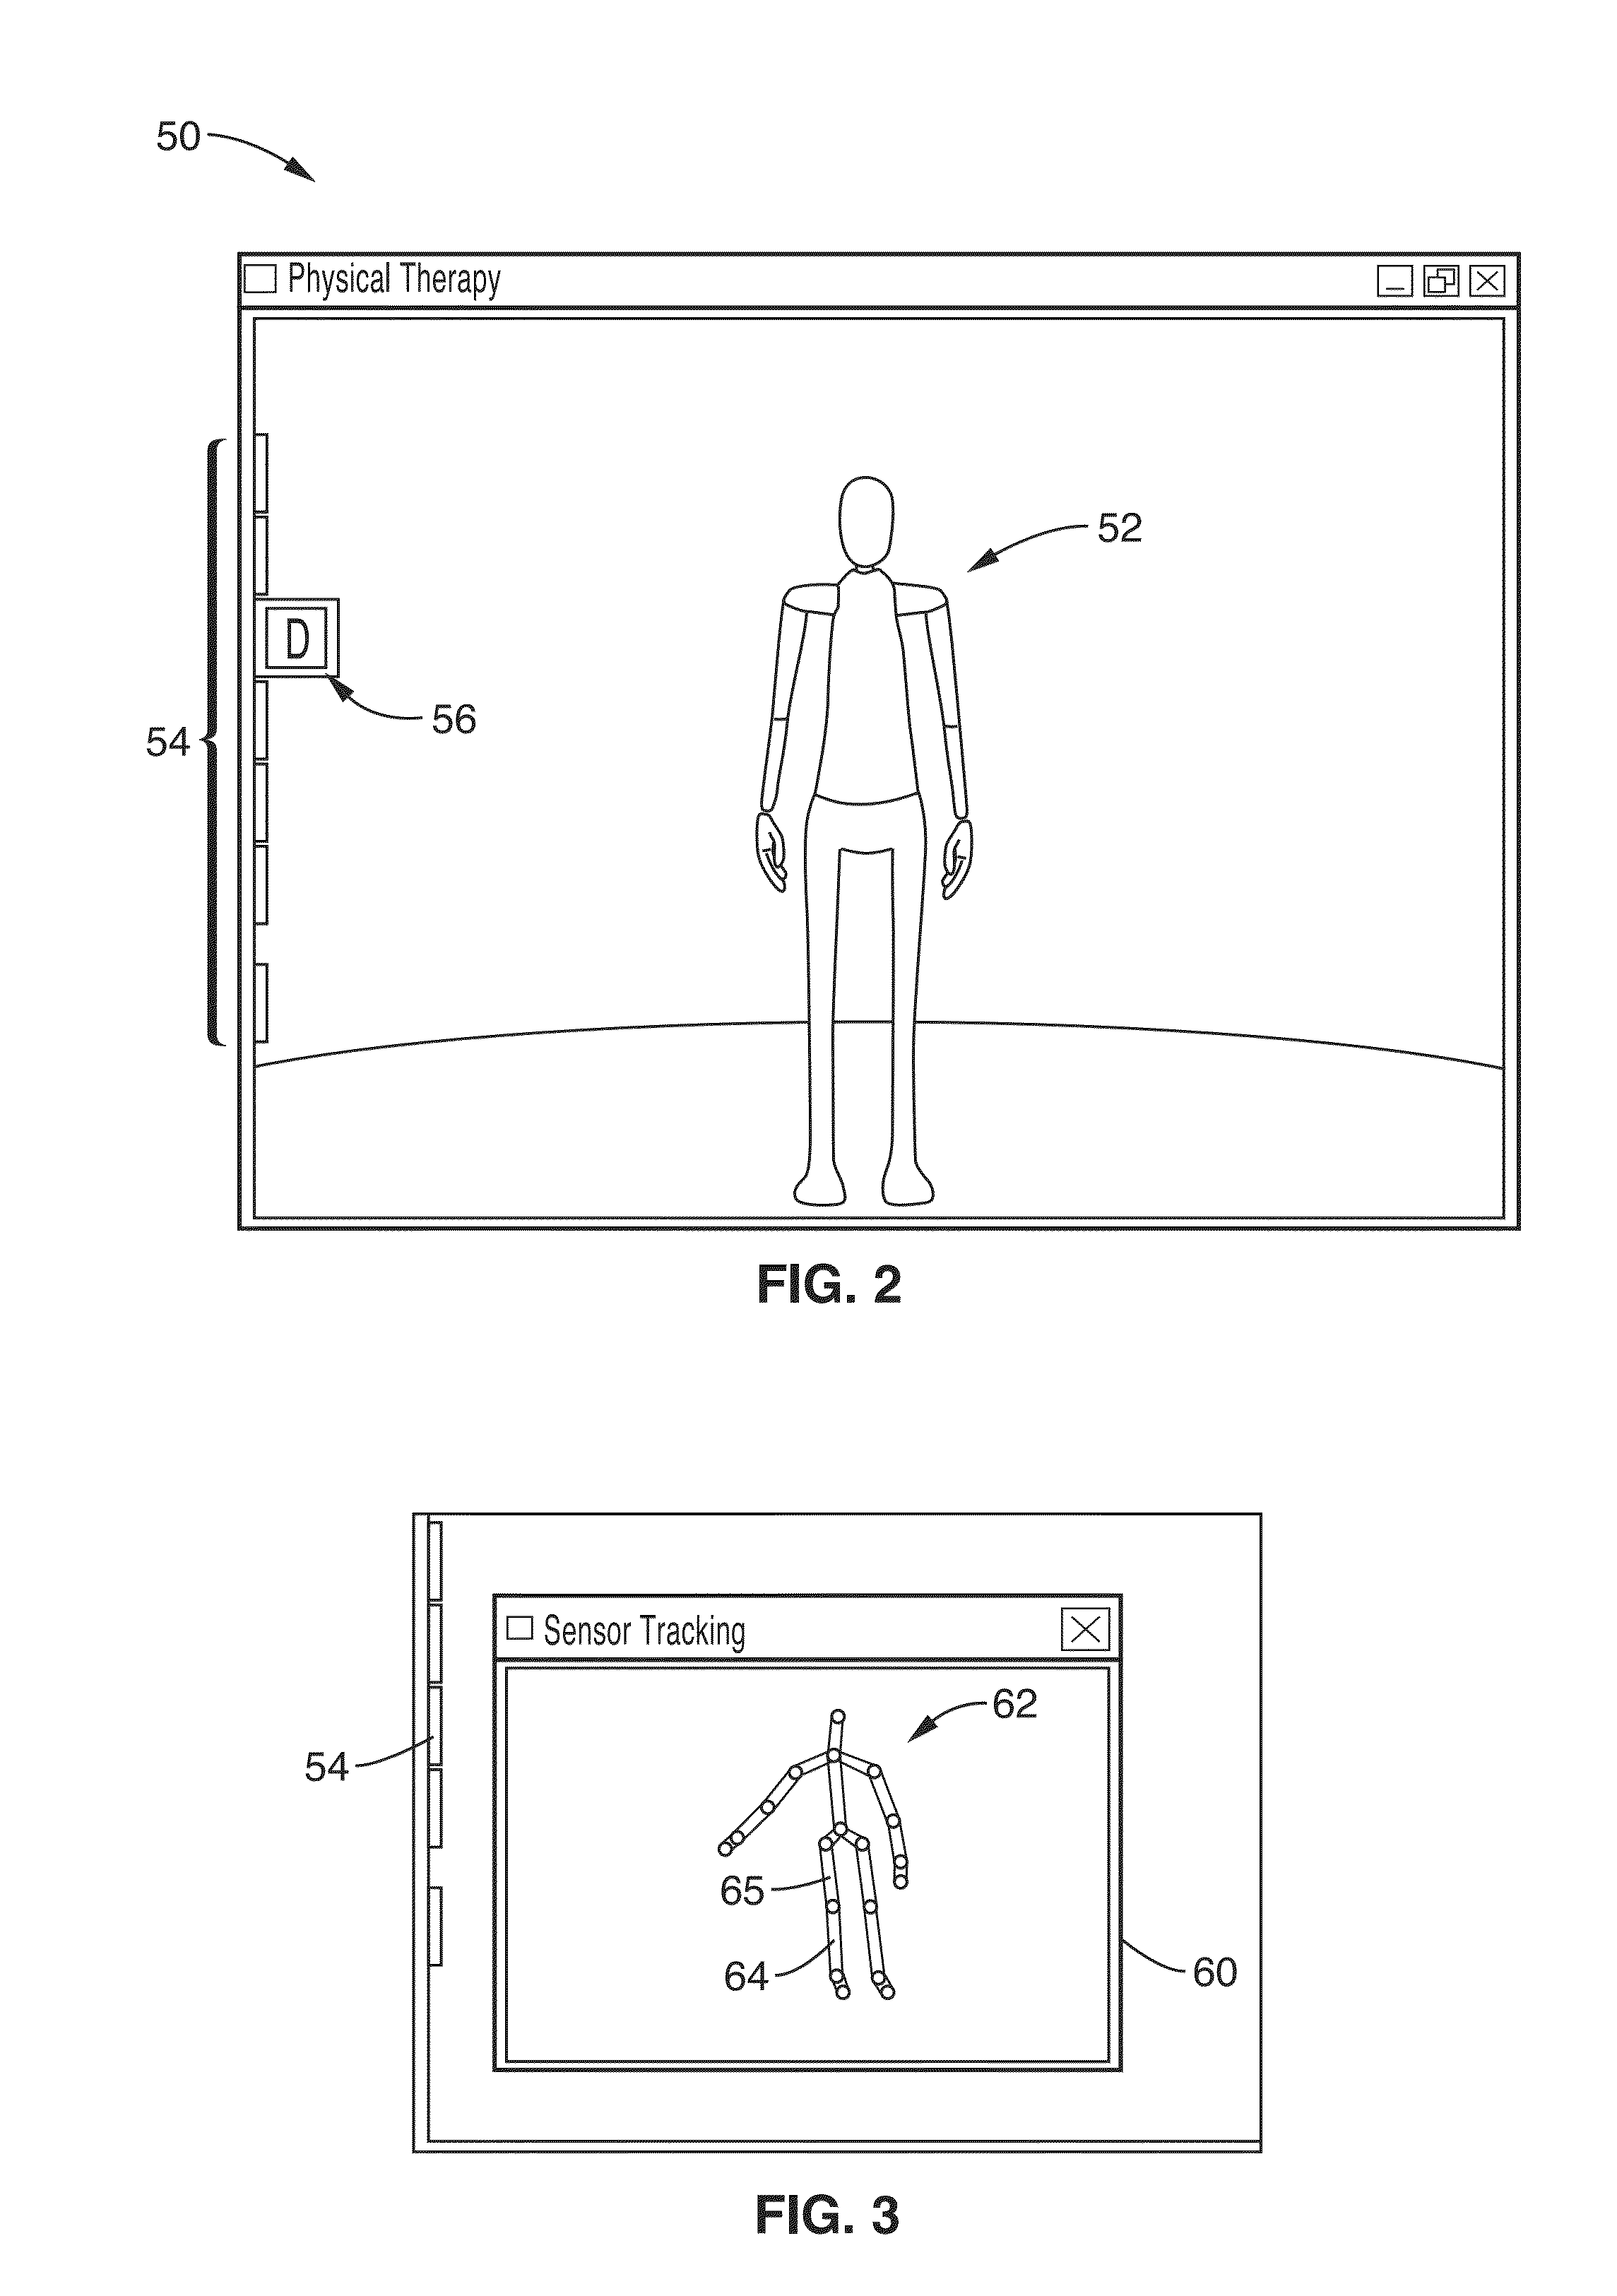 Systems and methods for real-time adaptive therapy and rehabilitation